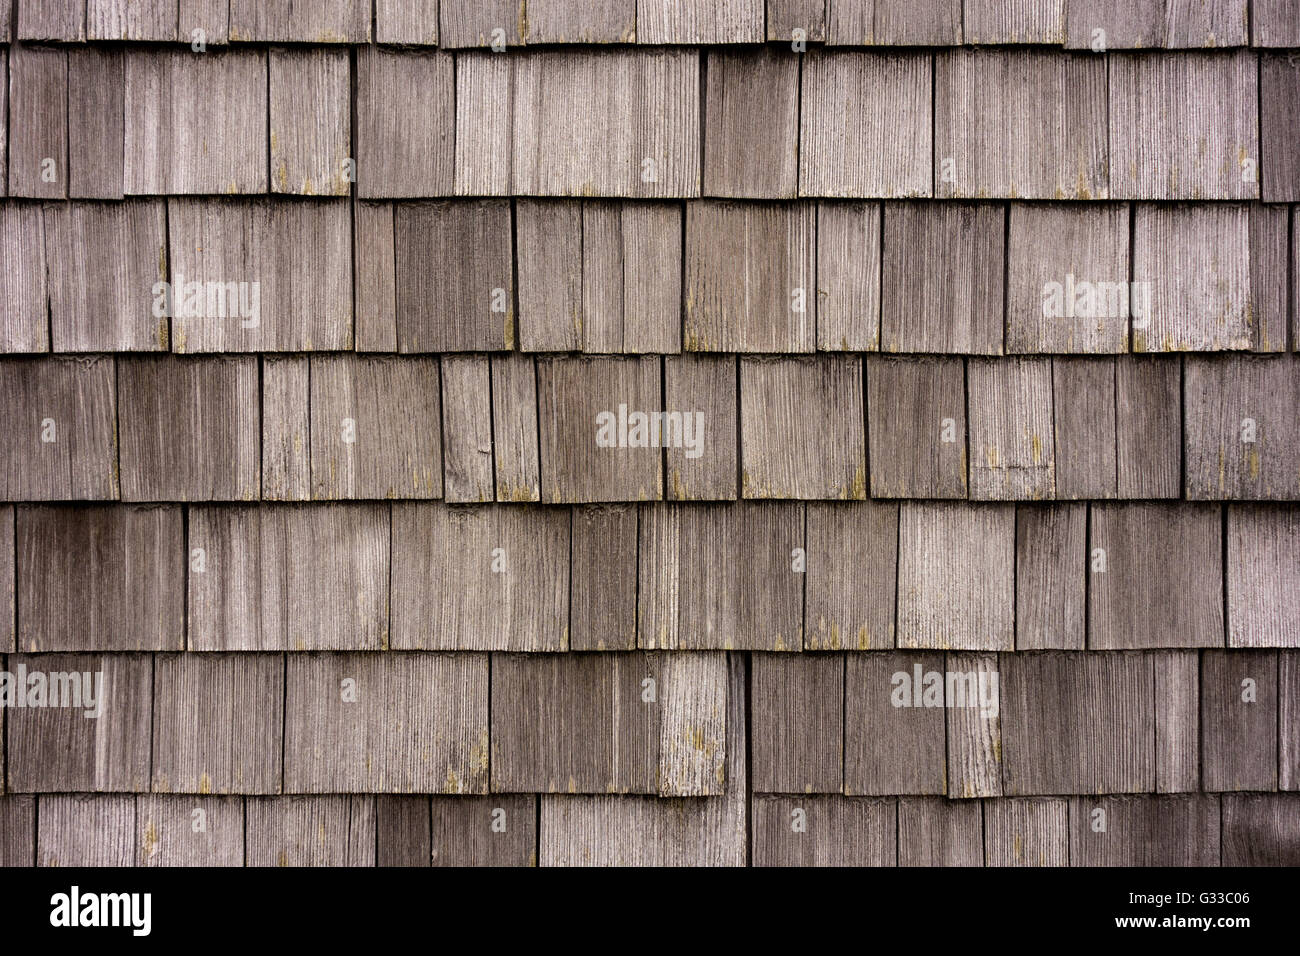 Wood Shingle Facade High Resolution Stock Photography and Images - Alamy